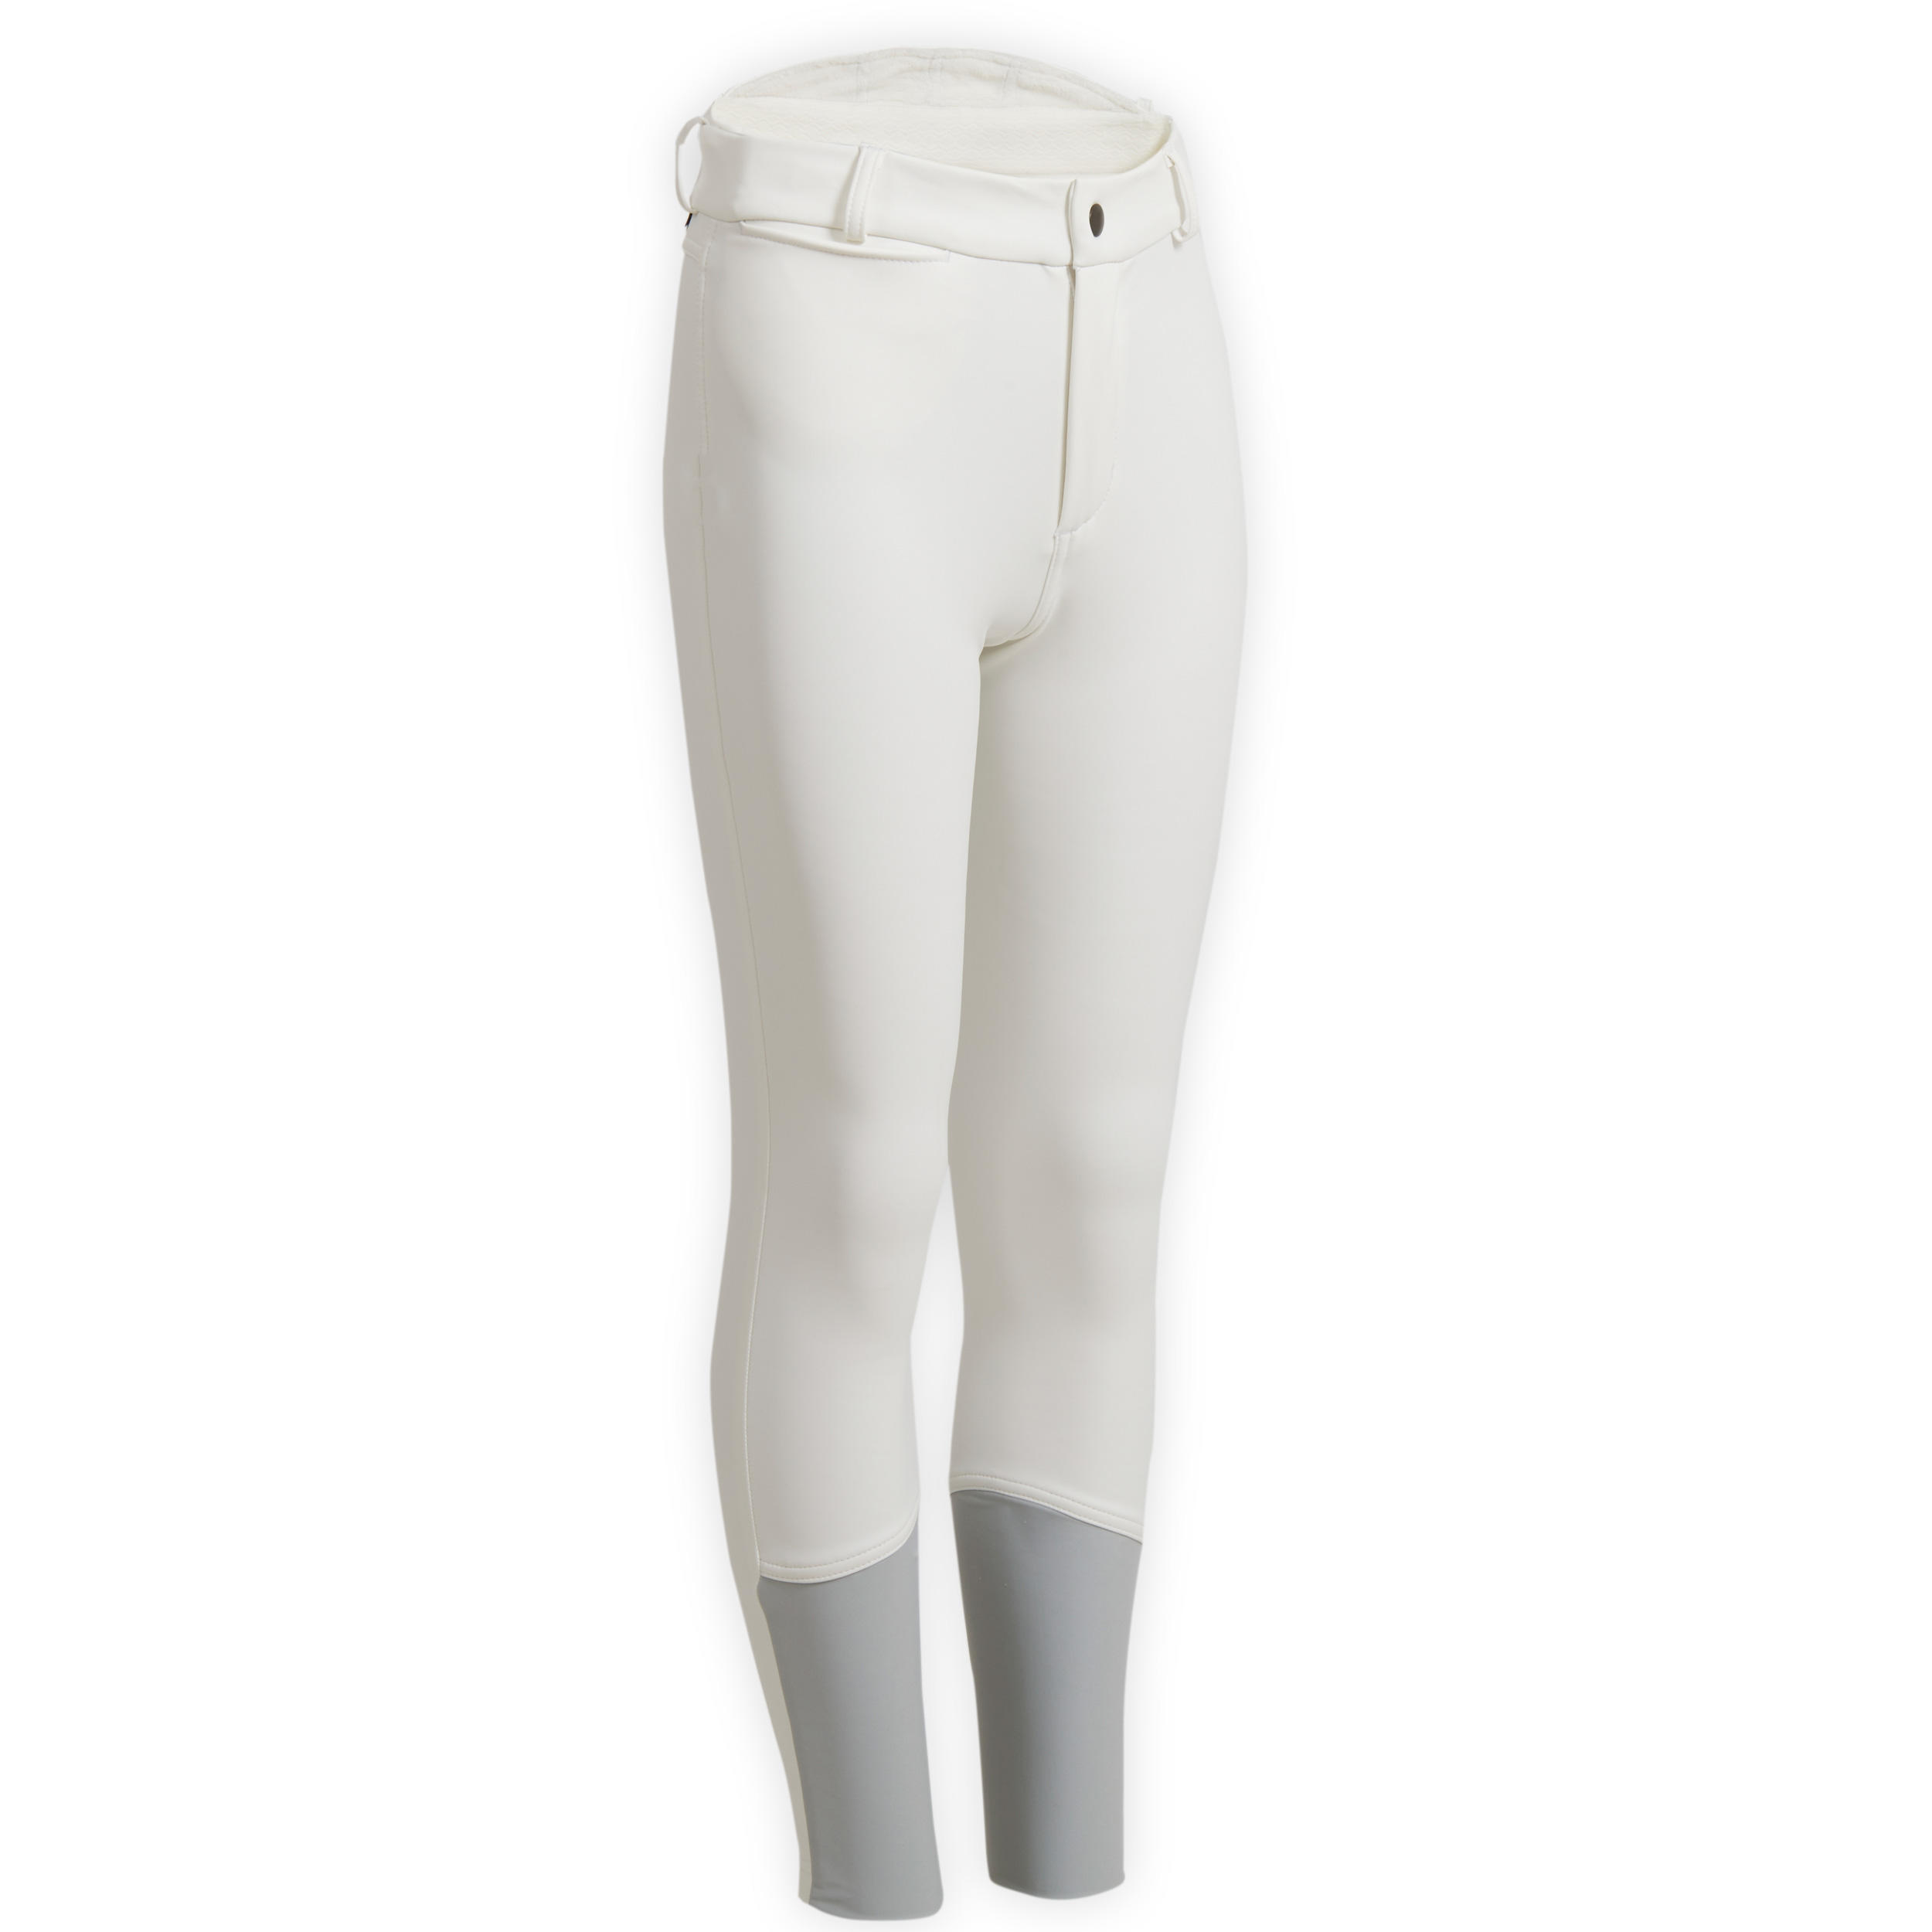 Kids' Horse Riding Warm and Water Repellent Competition Jodhpurs 500 Kipwarm - White 1/9